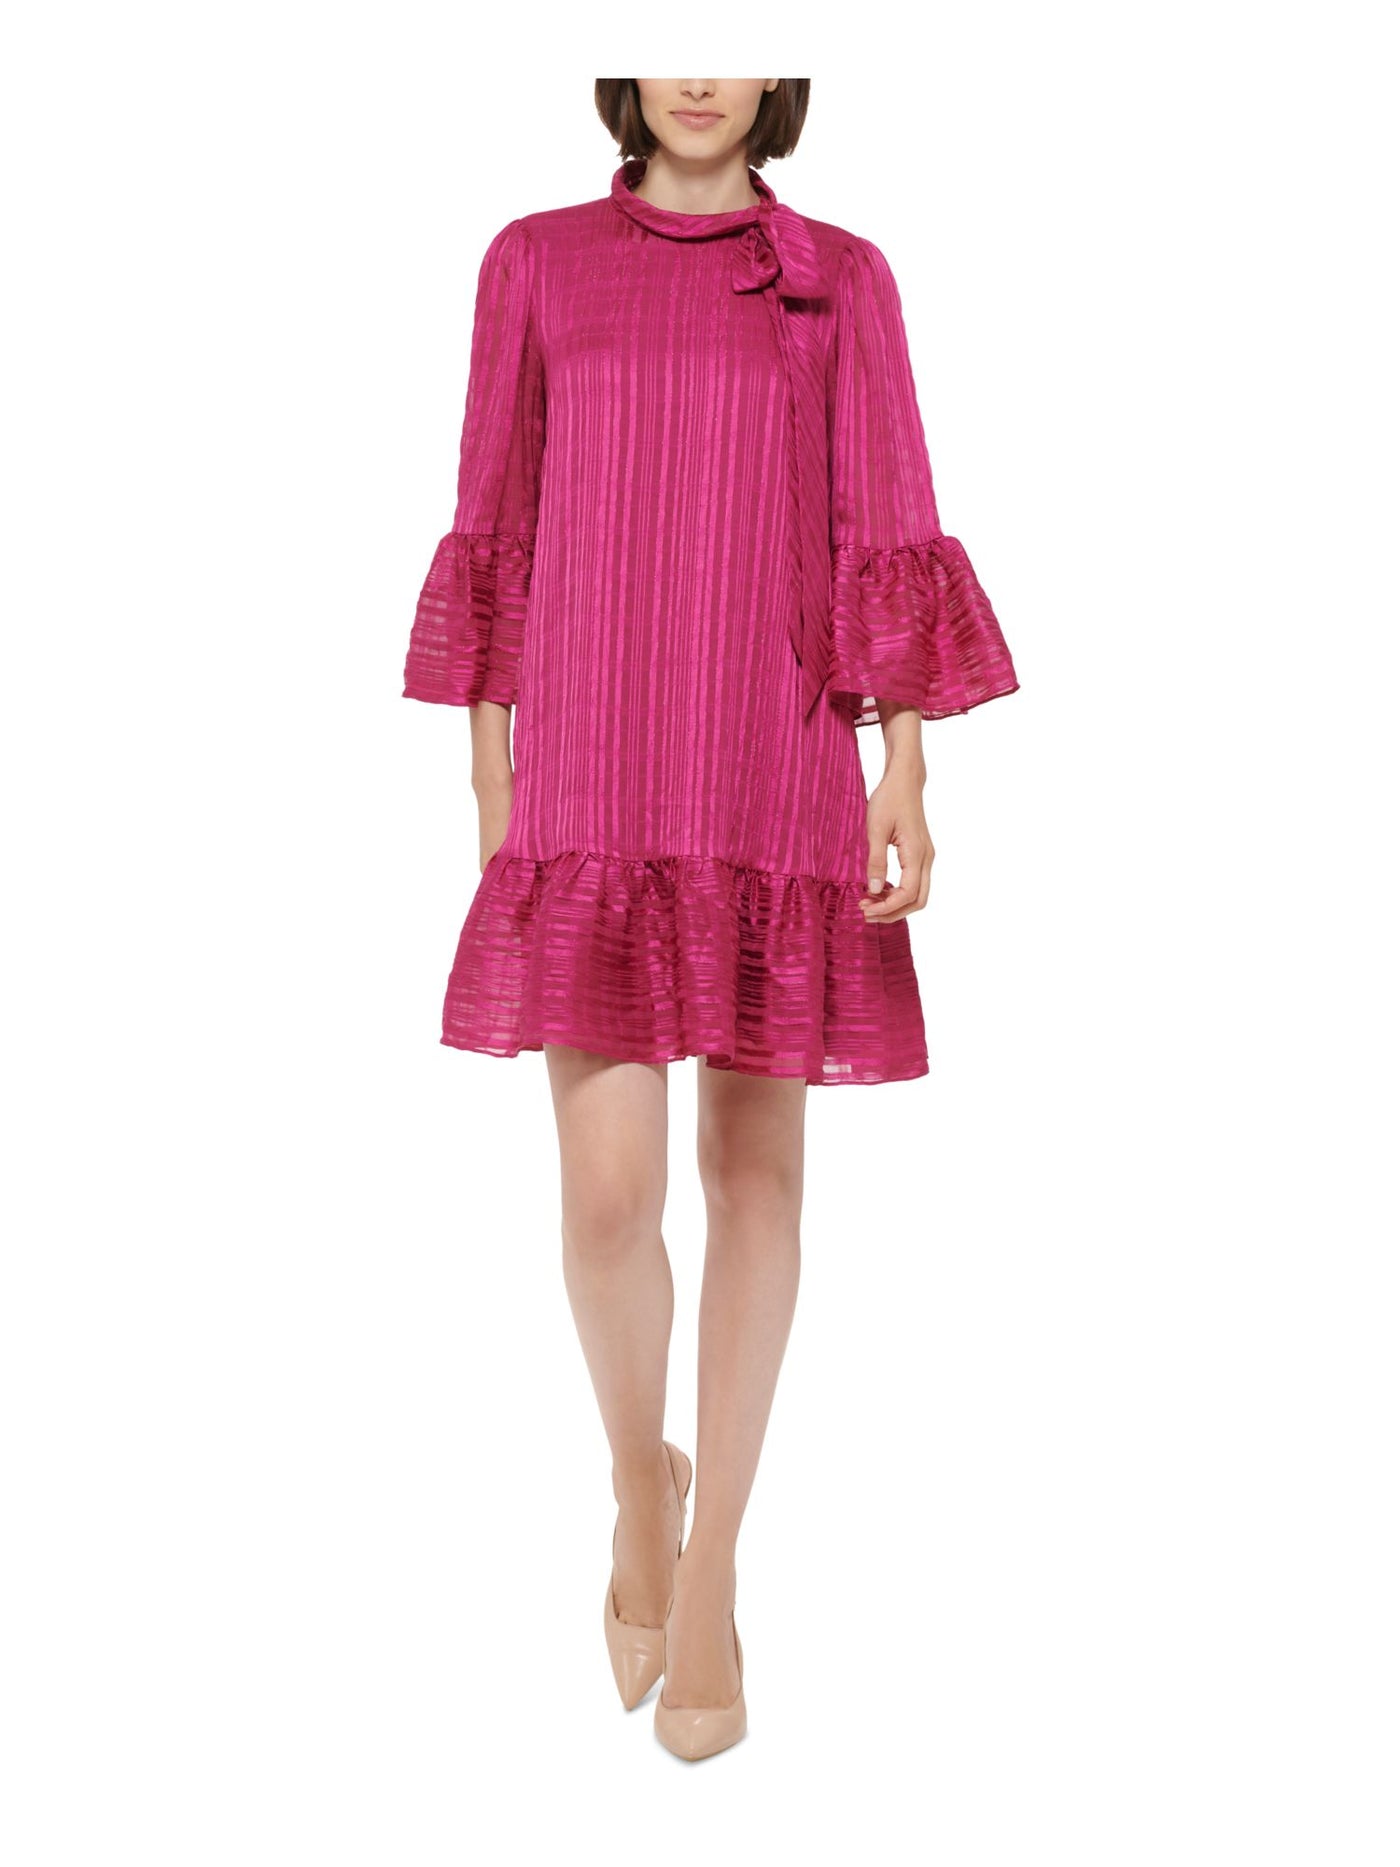 CALVIN KLEIN Womens Pink Striped Bell Sleeve Tie Neck Above The Knee Cocktail Shift Dress 14